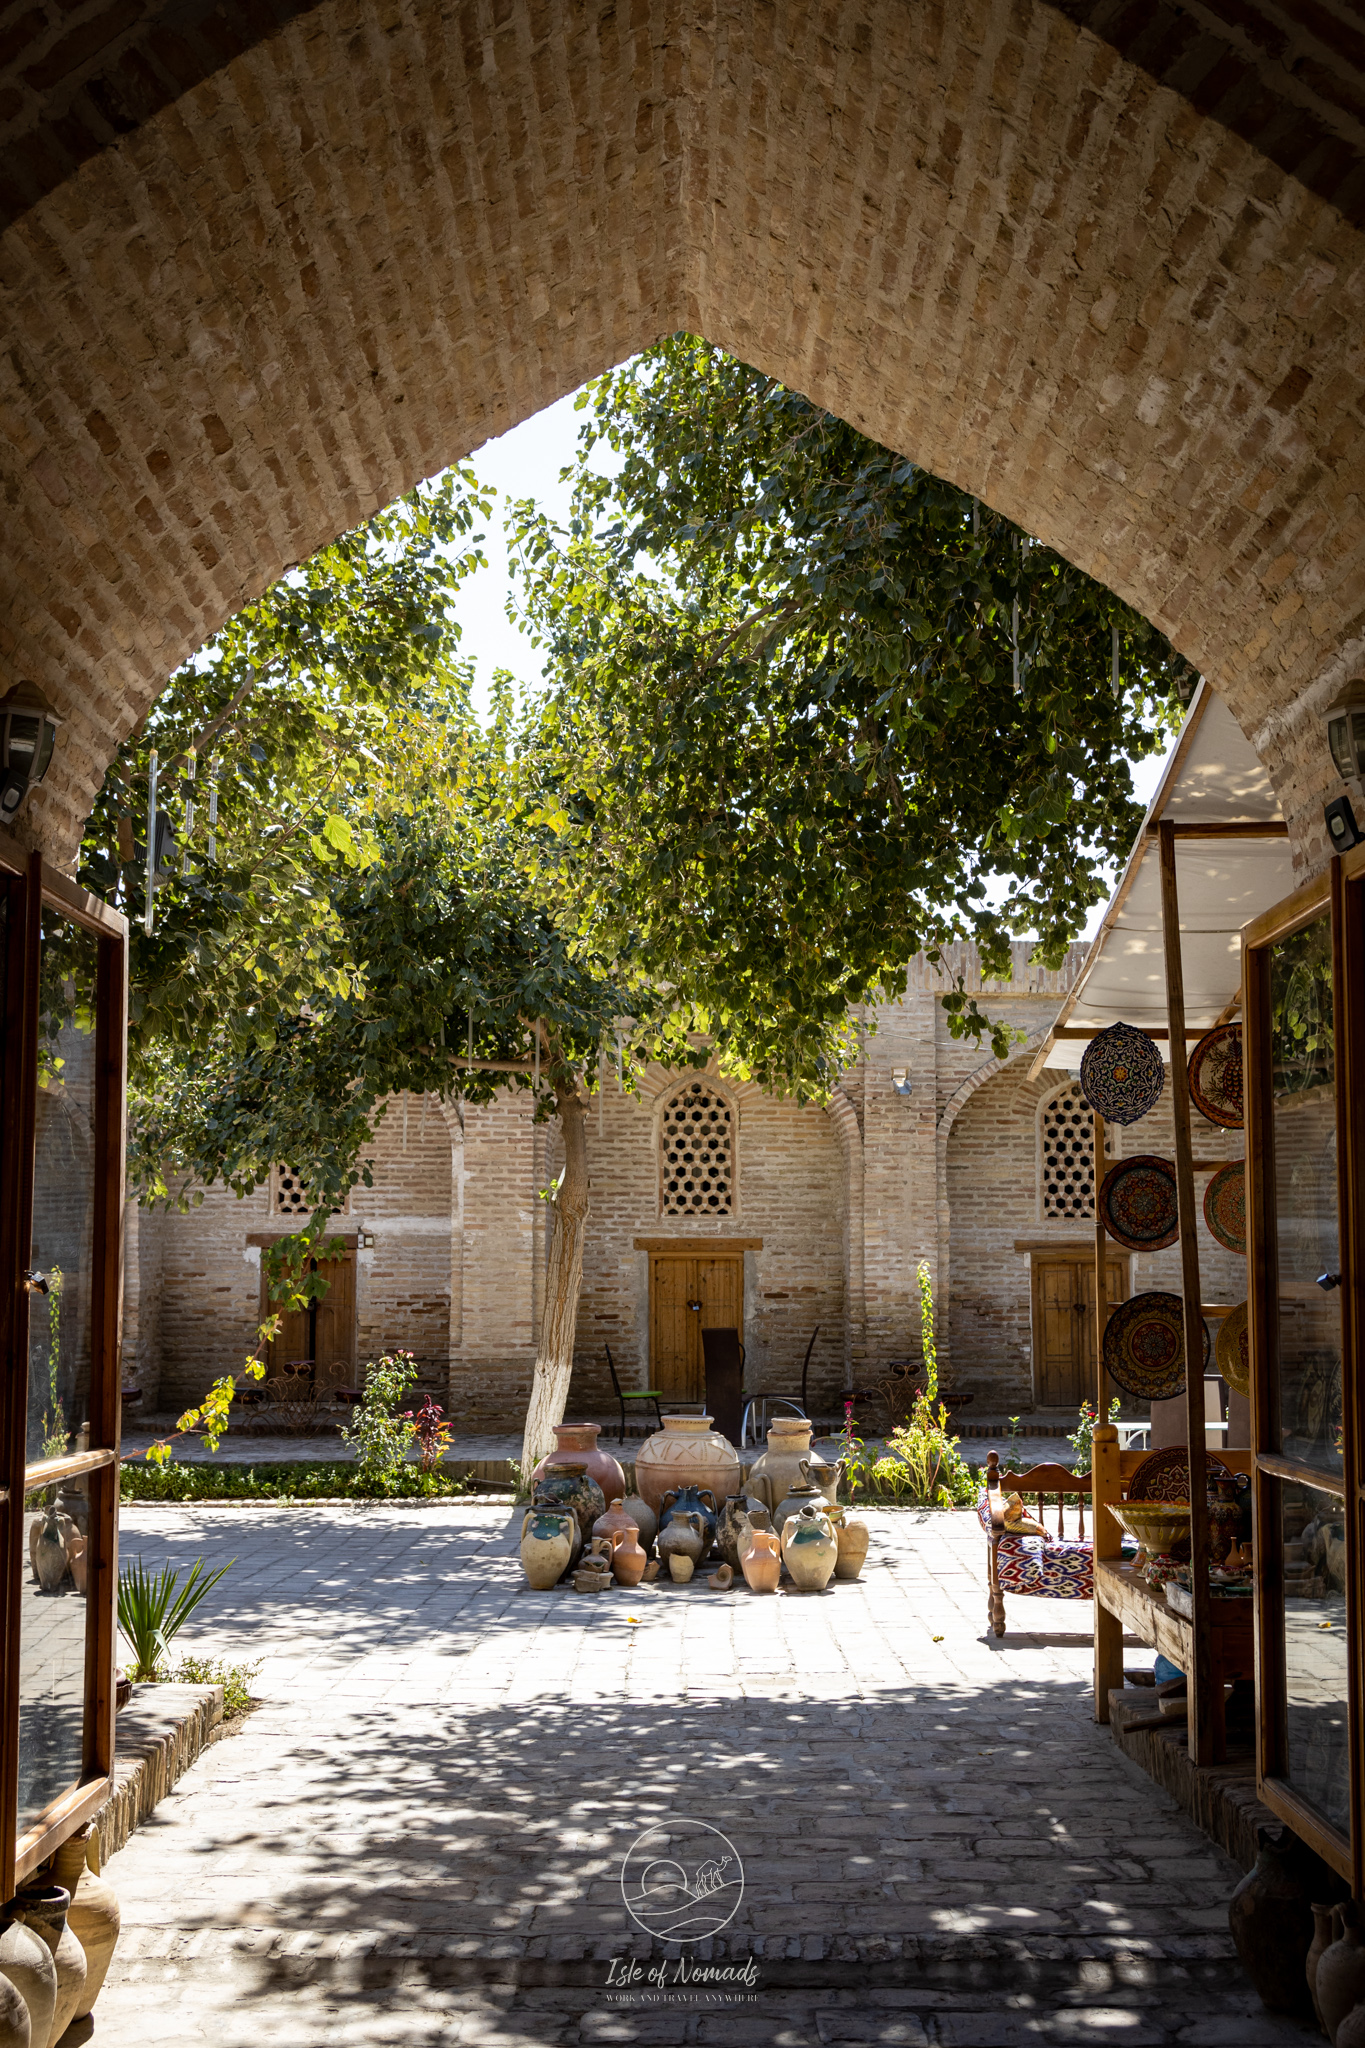 Bukhara's bazaar is another thing you should not miss...